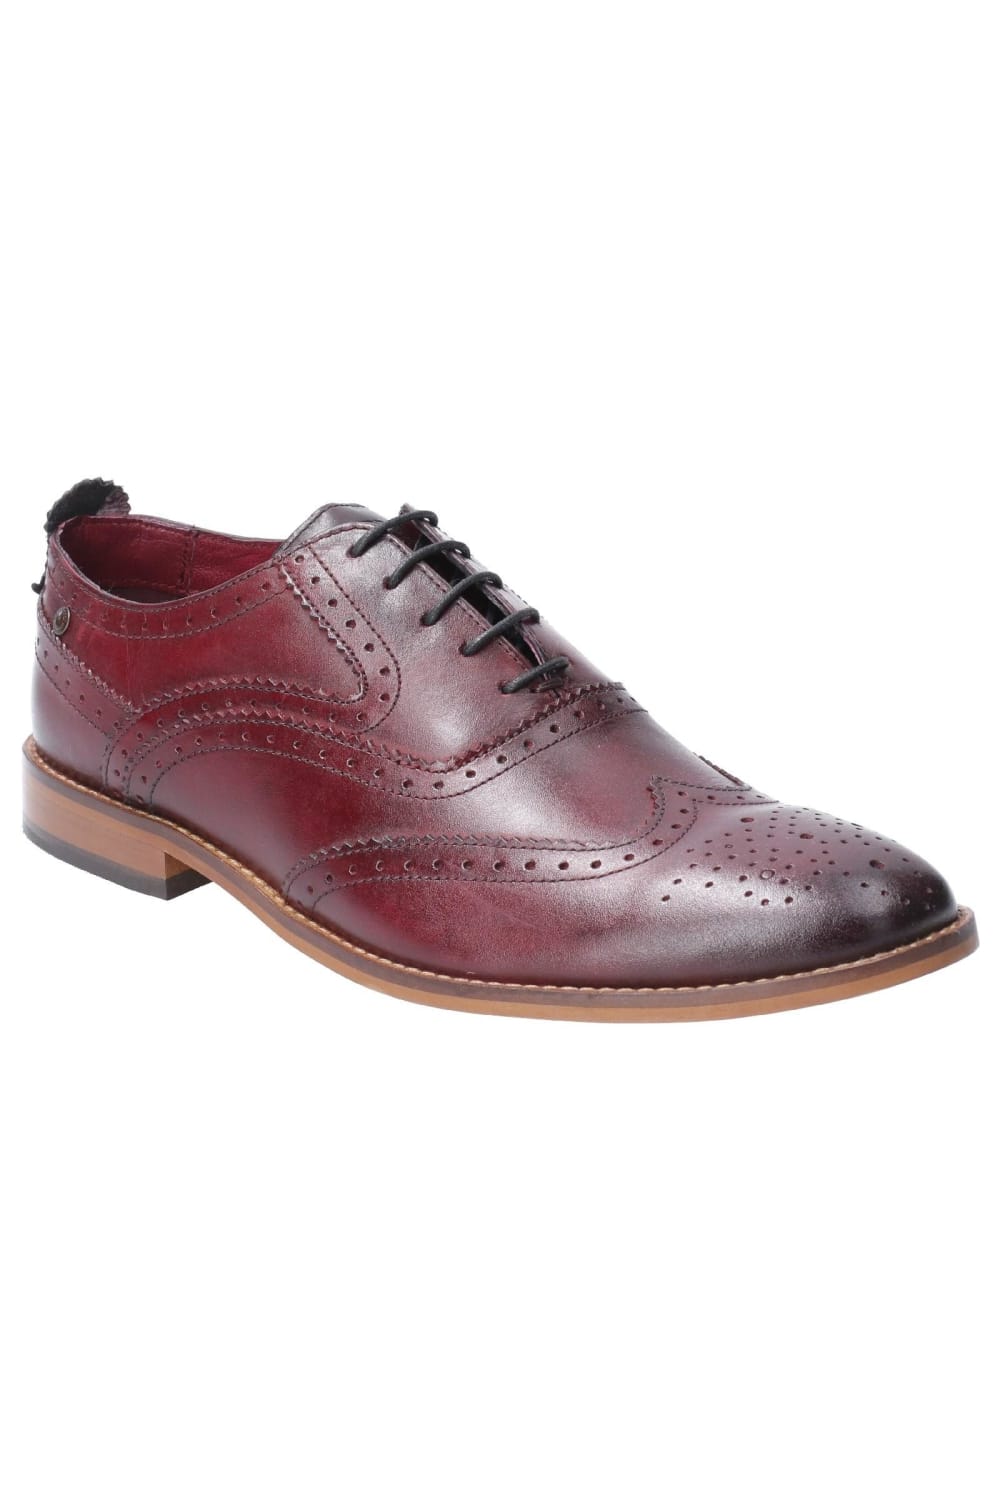 Mens Focus Washed Lace Up Oxford Leather Shoe - Bordeaux Red